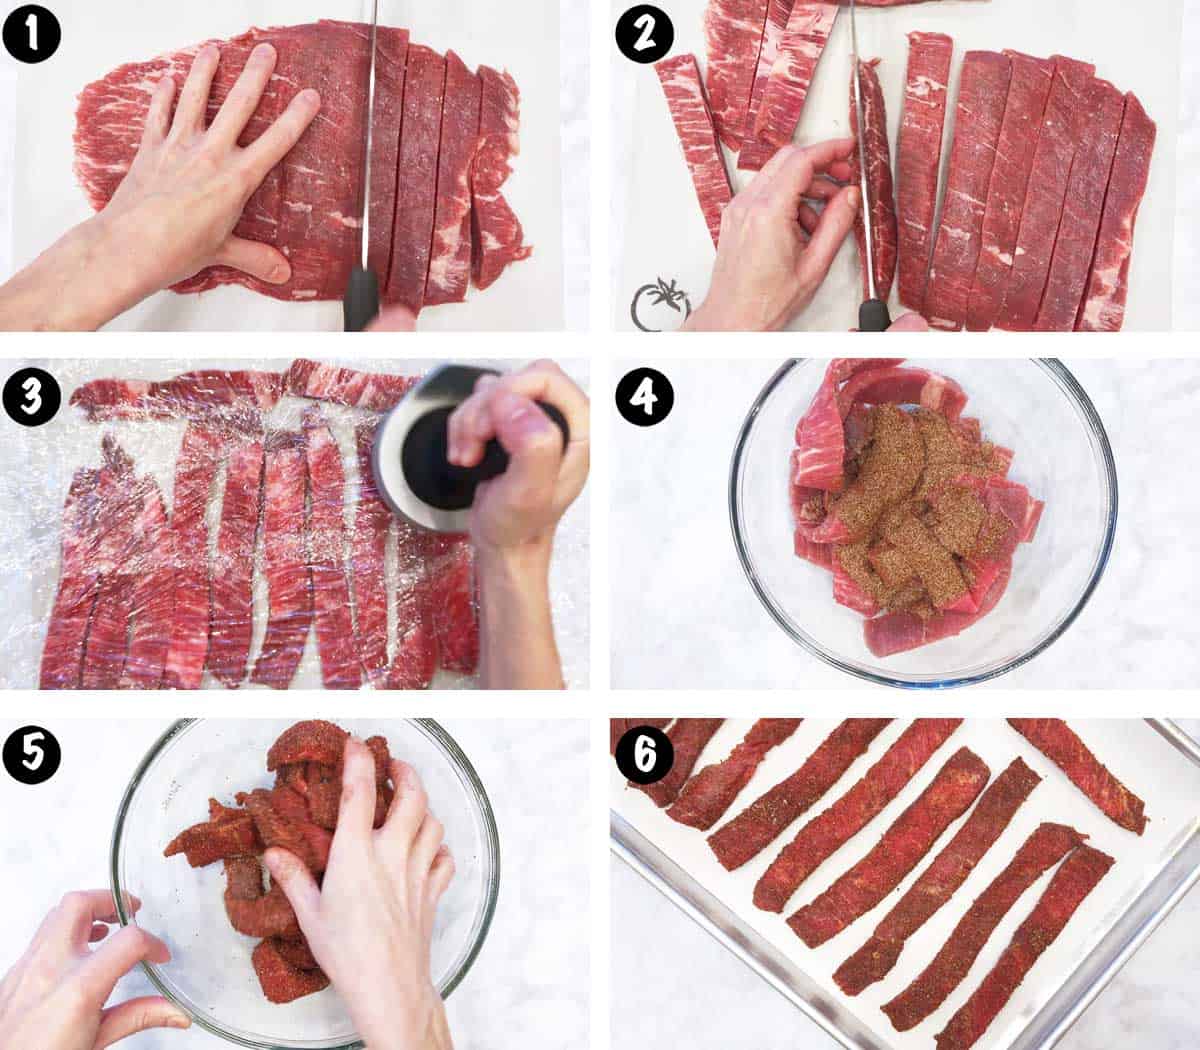 A photo collage showing steps 1-6 for making beef jerky.  